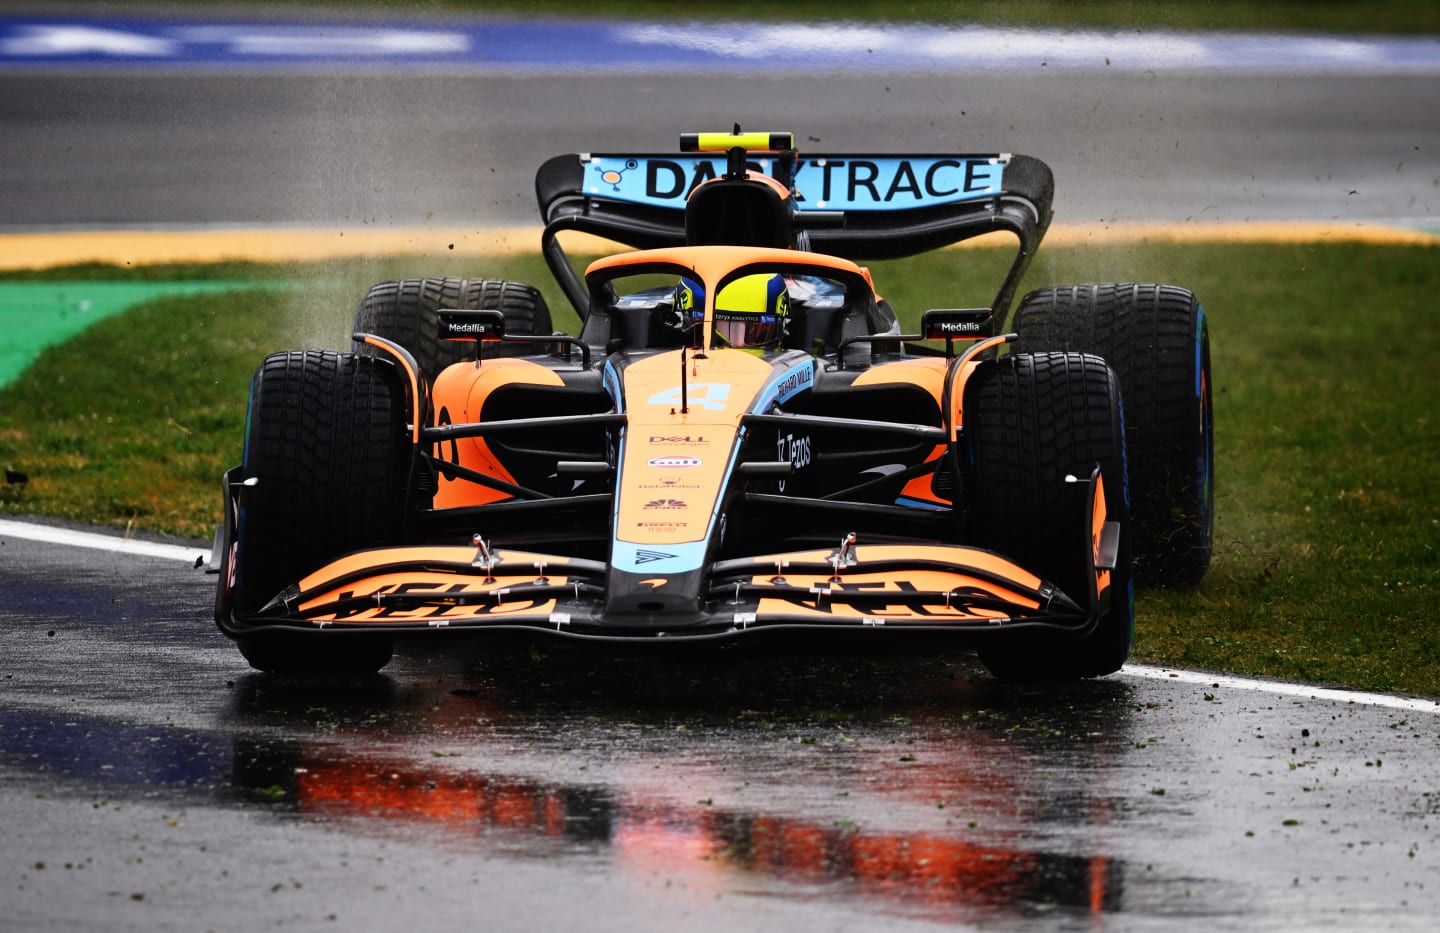 IMOLA, ITALY - APRIL 22: Lando Norris of Great Britain driving the (4) McLaren MCL36 Mercedes runs wide during practice ahead of the F1 Grand Prix of Emilia Romagna at Autodromo Enzo e Dino Ferrari on April 22, 2022 in Imola, Italy. (Photo by Clive Mason/Getty Images)